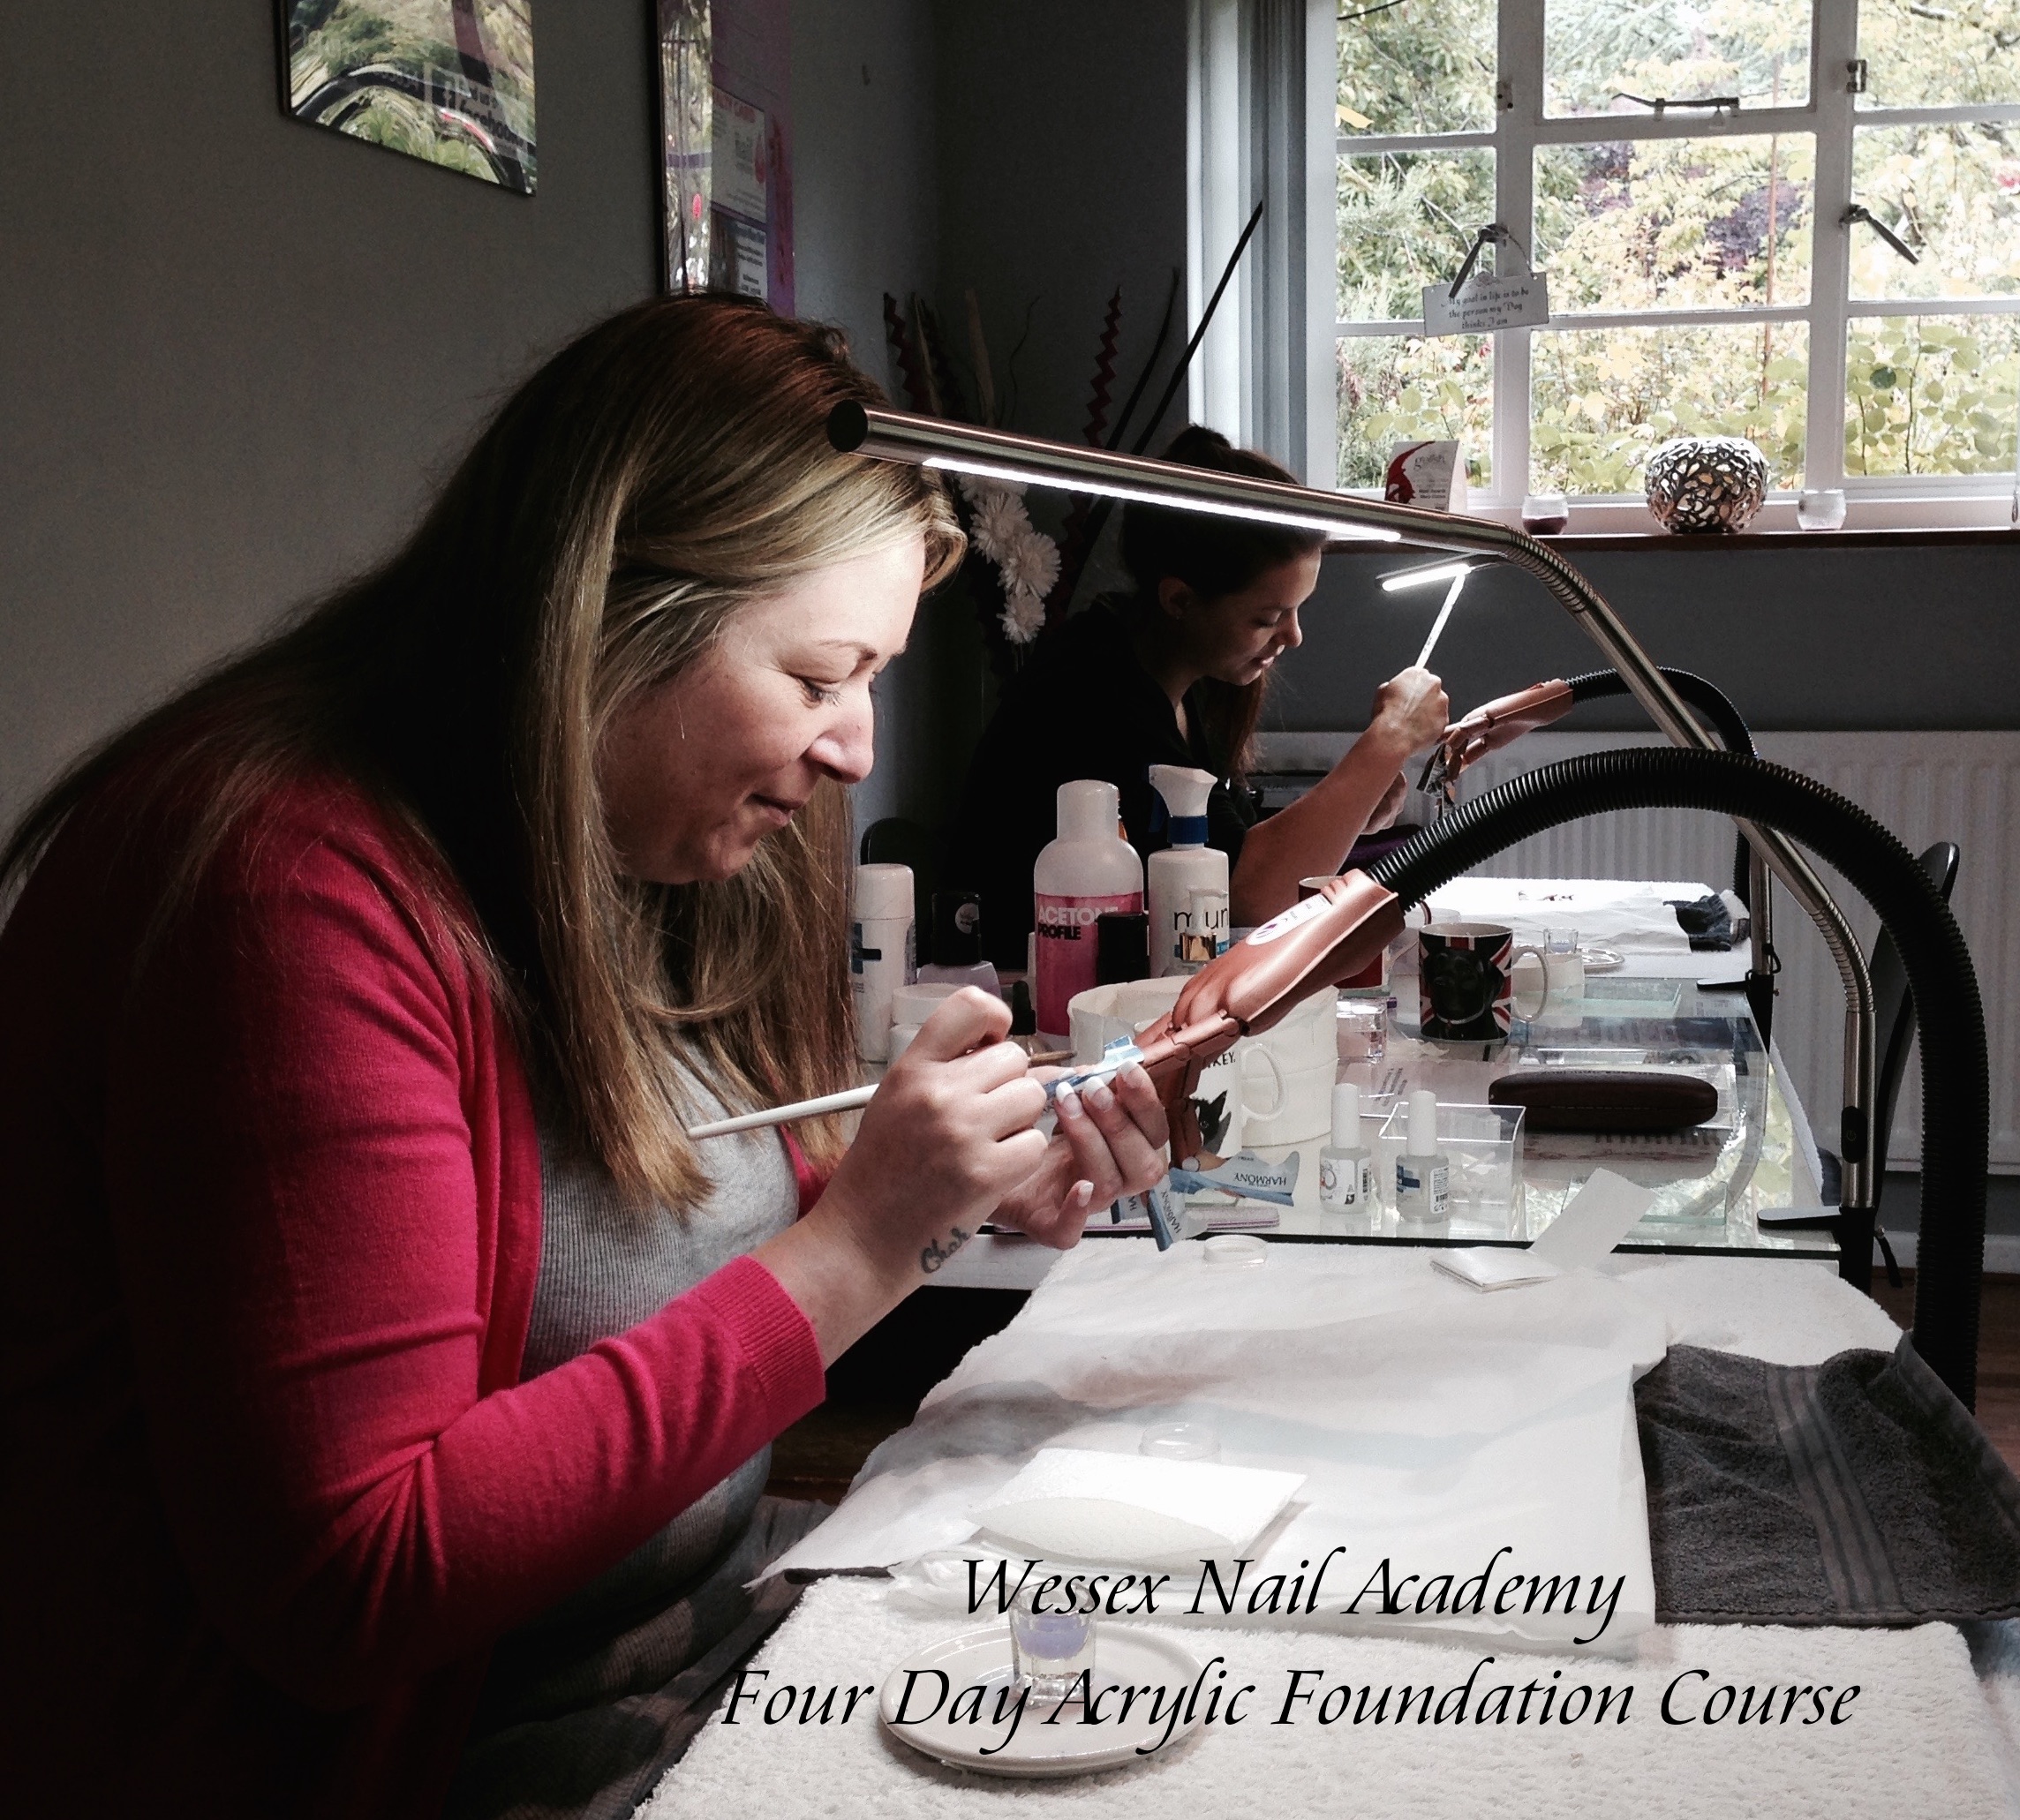 Four Day Acrylic Foundation Courses, Nail extension training, nail training course, Wessex Nail Academy Okeford Fitzpaine, Dorset